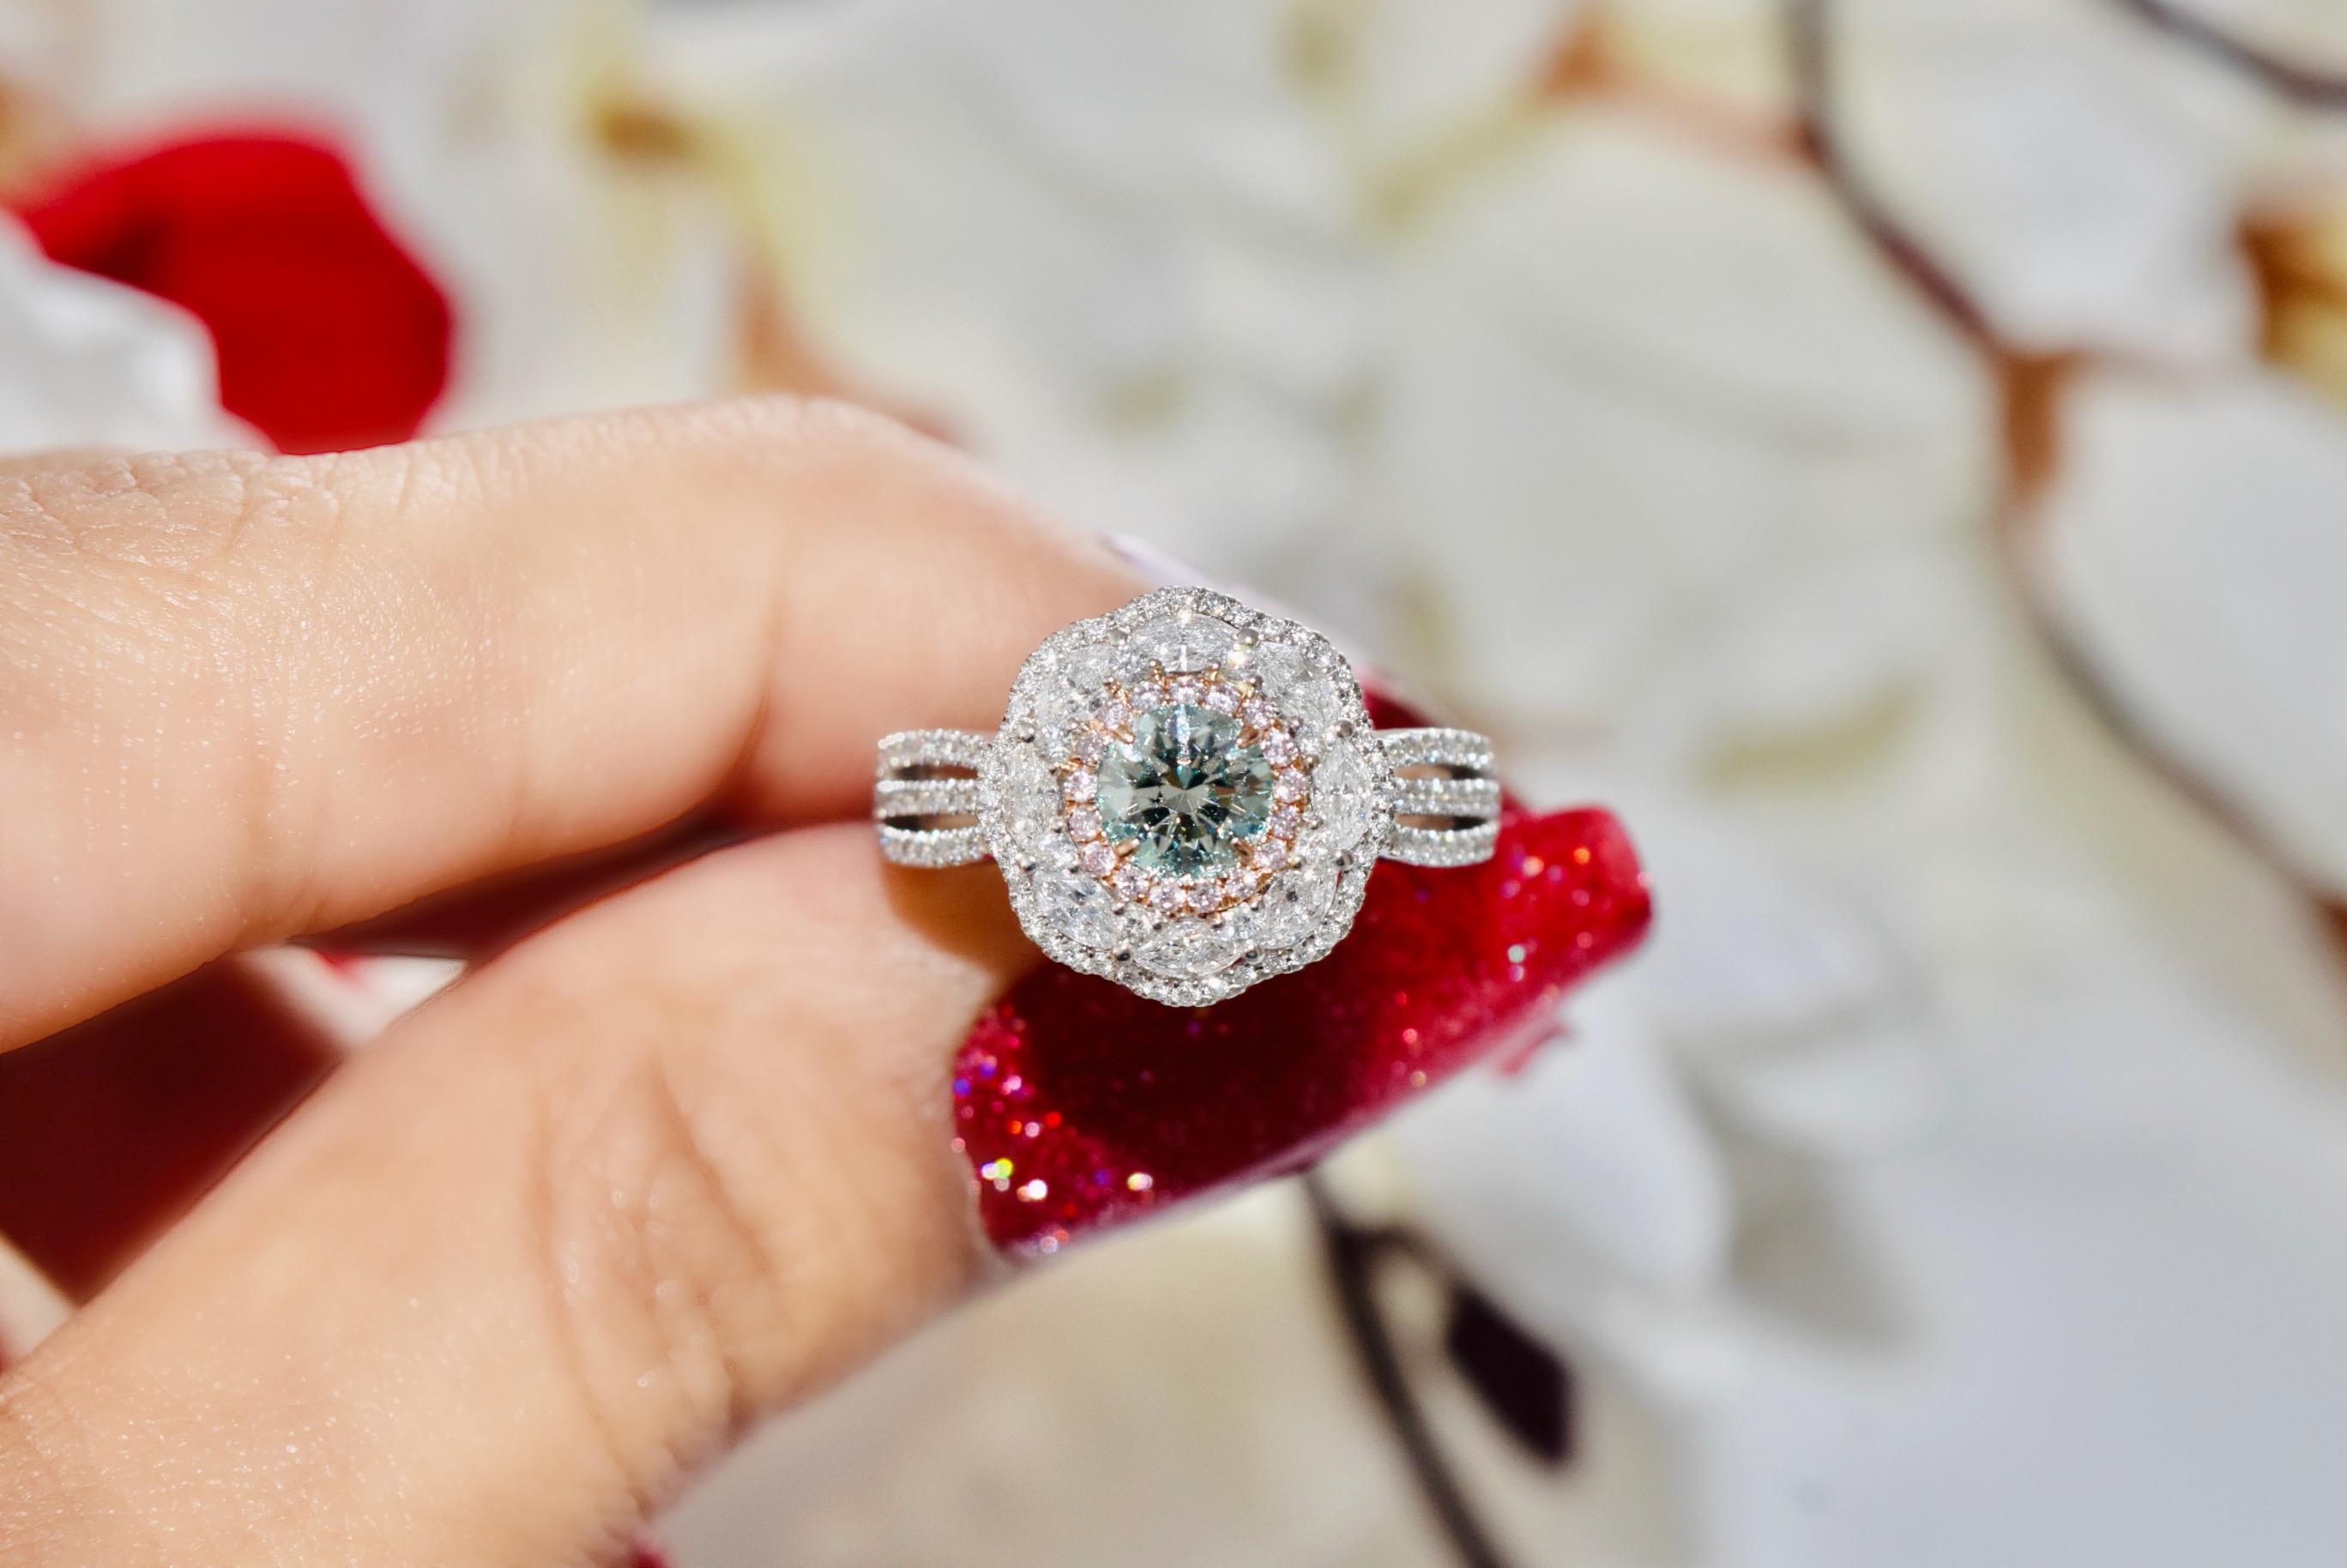 **100% NATURAL FANCY COLOUR DIAMOND JEWELRY**

✪ Jewelry Details ✪

♦ MAIN STONE DETAILS

➛ Stone Shape: Round
➛ Stone Color: Very light green-yellow
➛ Stone Weight: 0.50 carats
➛ Clarity: SI1
➛ GIA certified

♦ SIDE STONE DETAILS

➛ Side pink